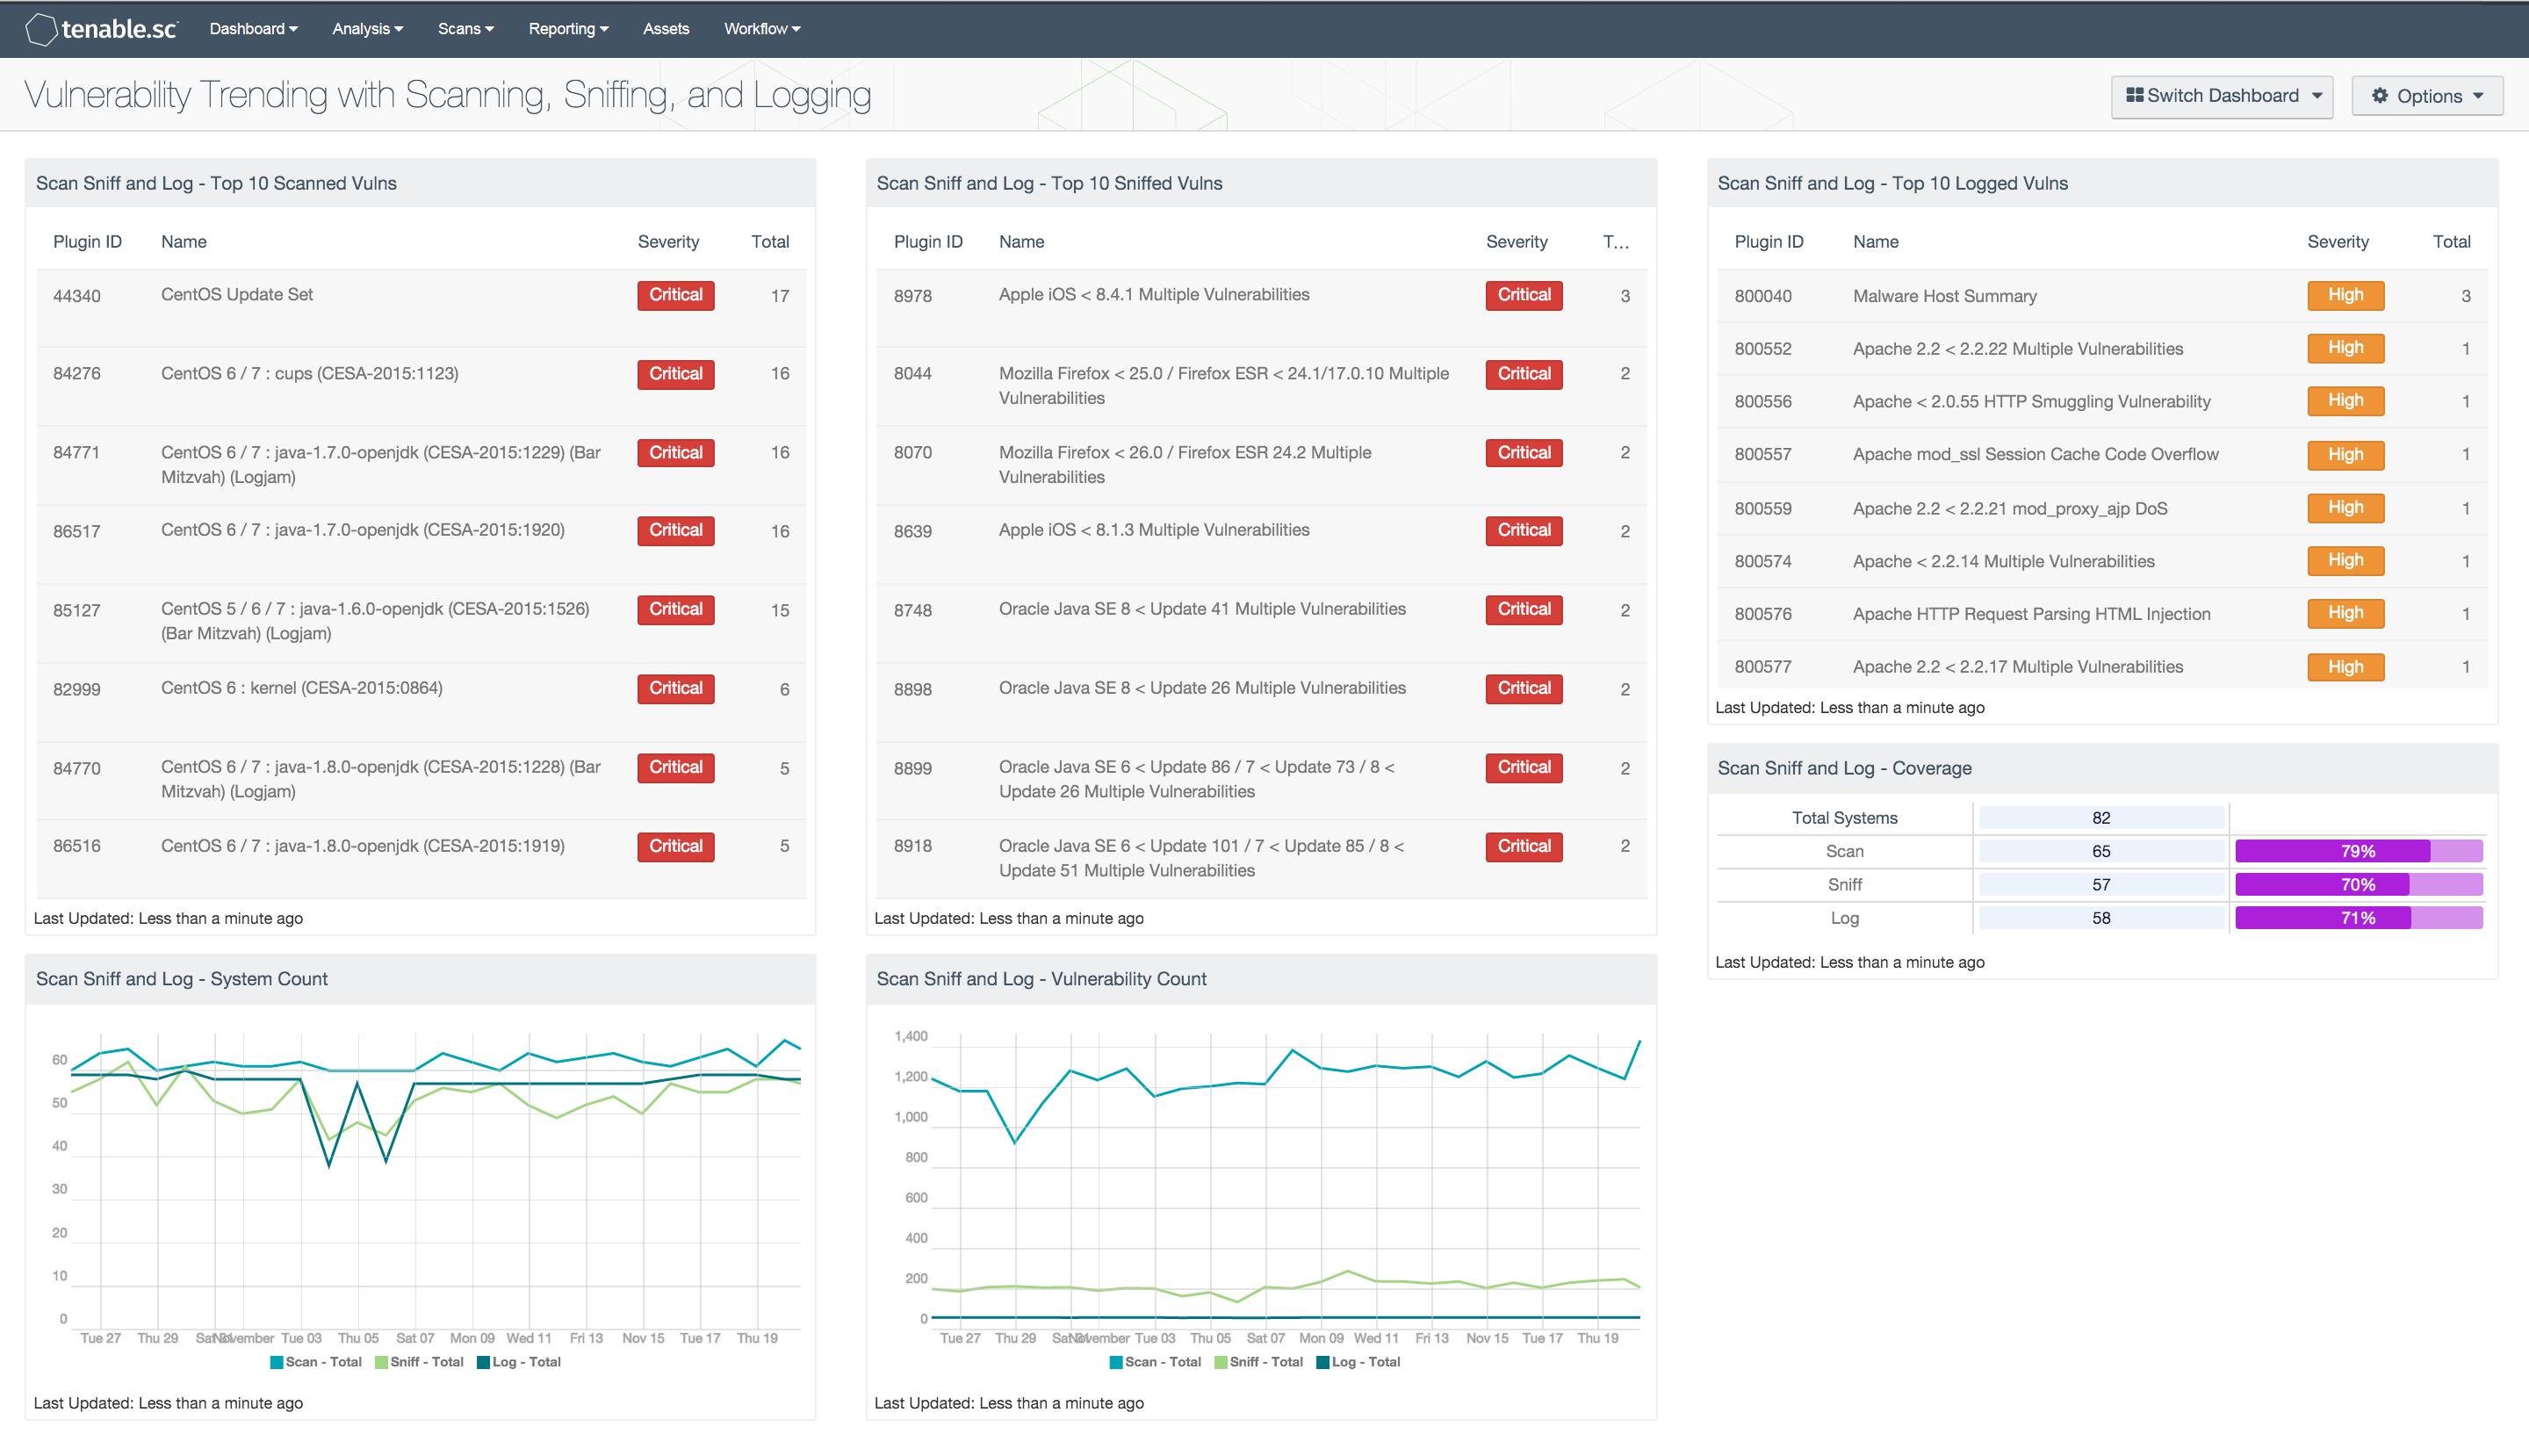 Vulnerability Trending with Scanning, Sniffing, and Logging Dashboard Screenshot